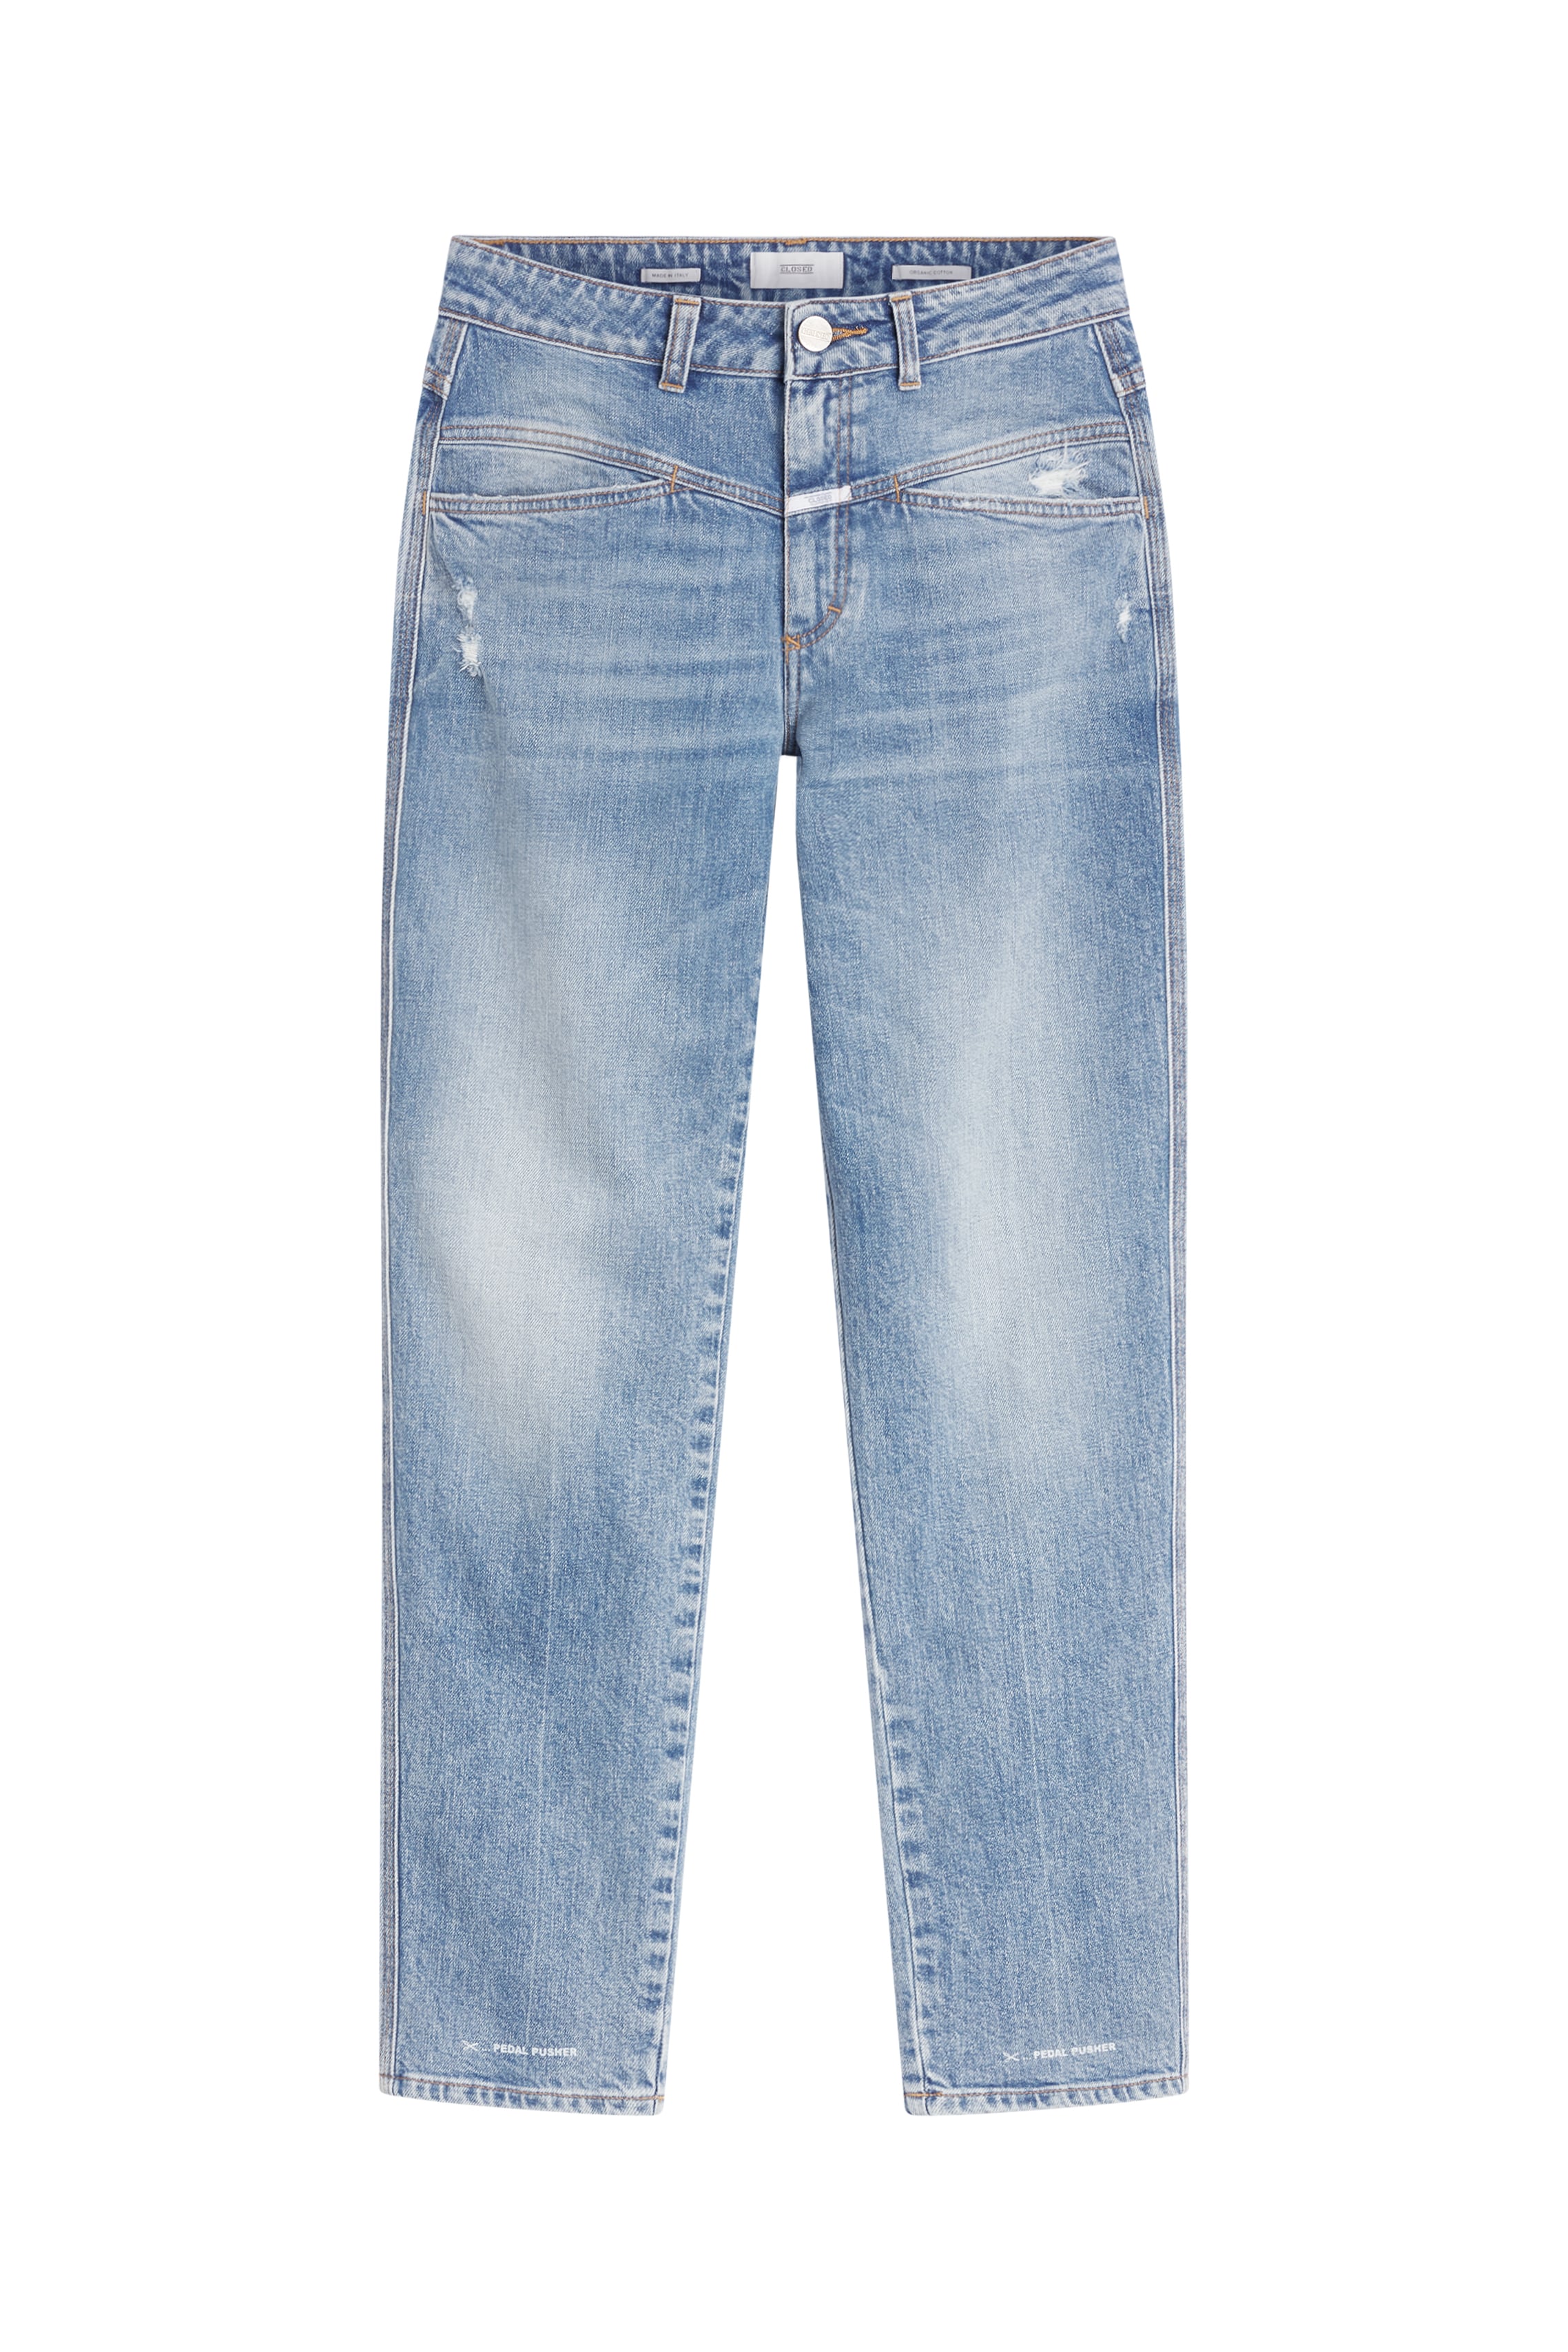 Pedal Pusher Jeans